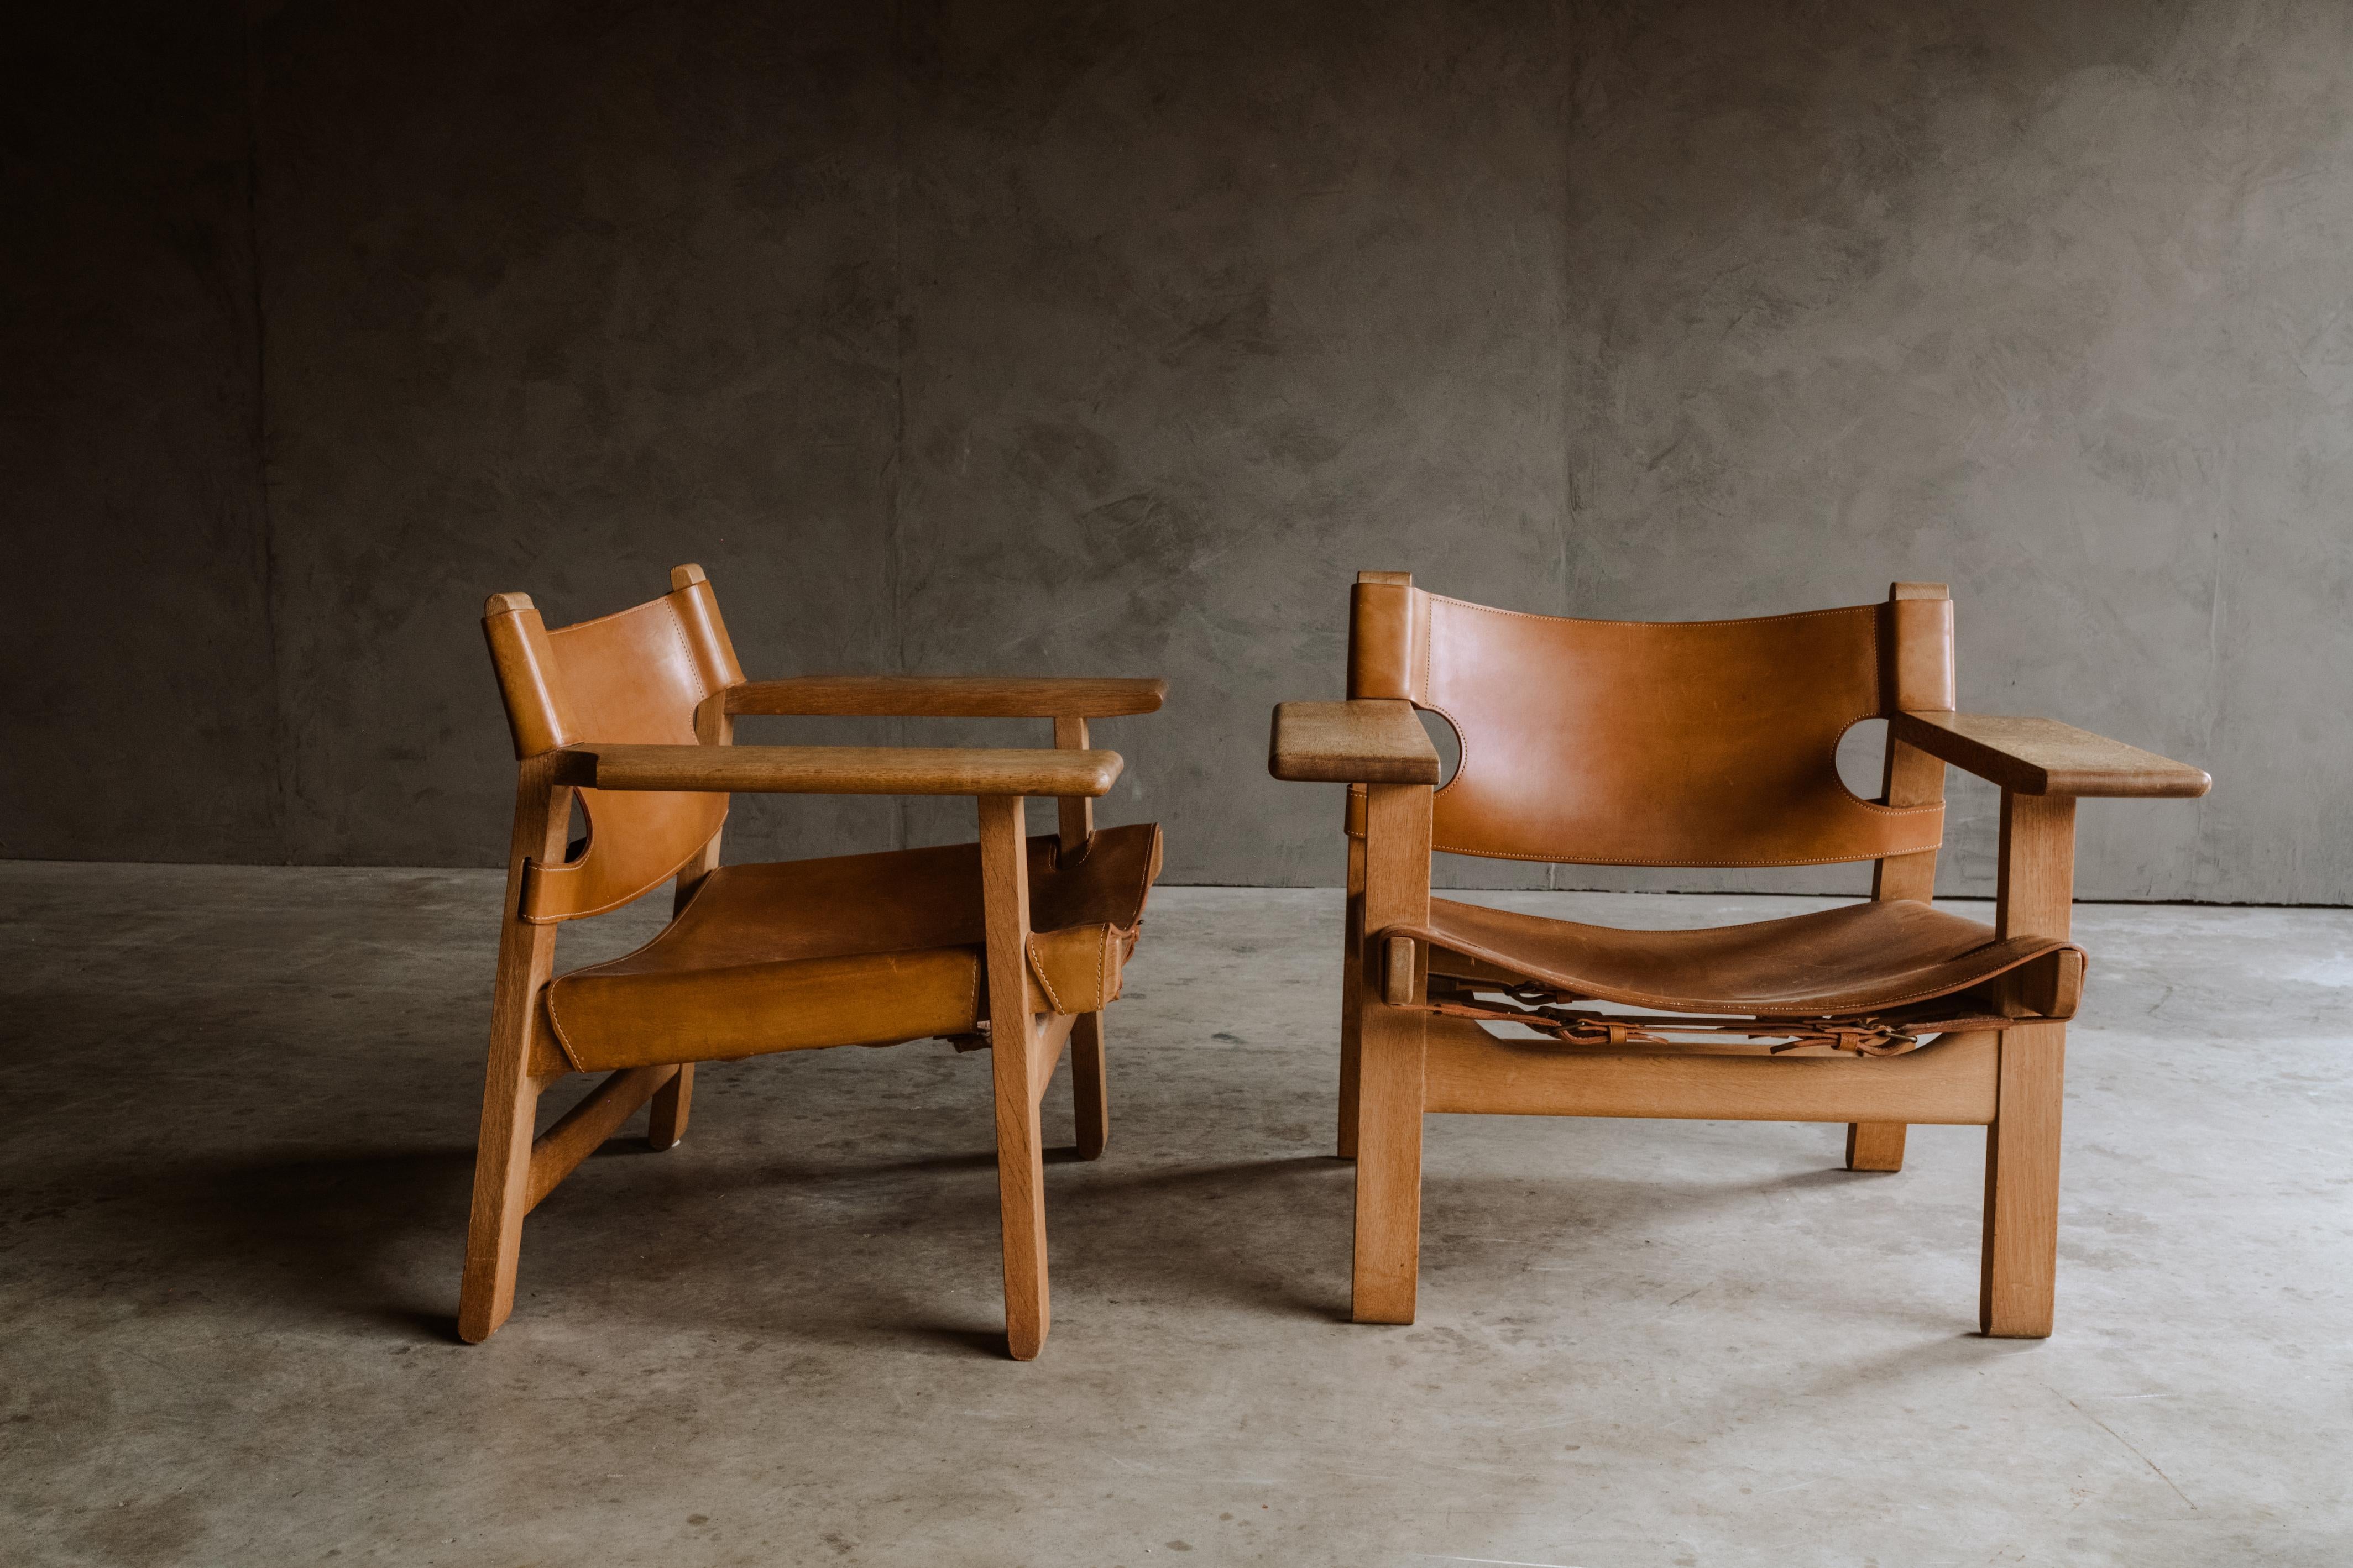 Late 20th Century Vintage Pair of Spanish Chairs Designed by Børge Mogensen, Denmark, 1970s